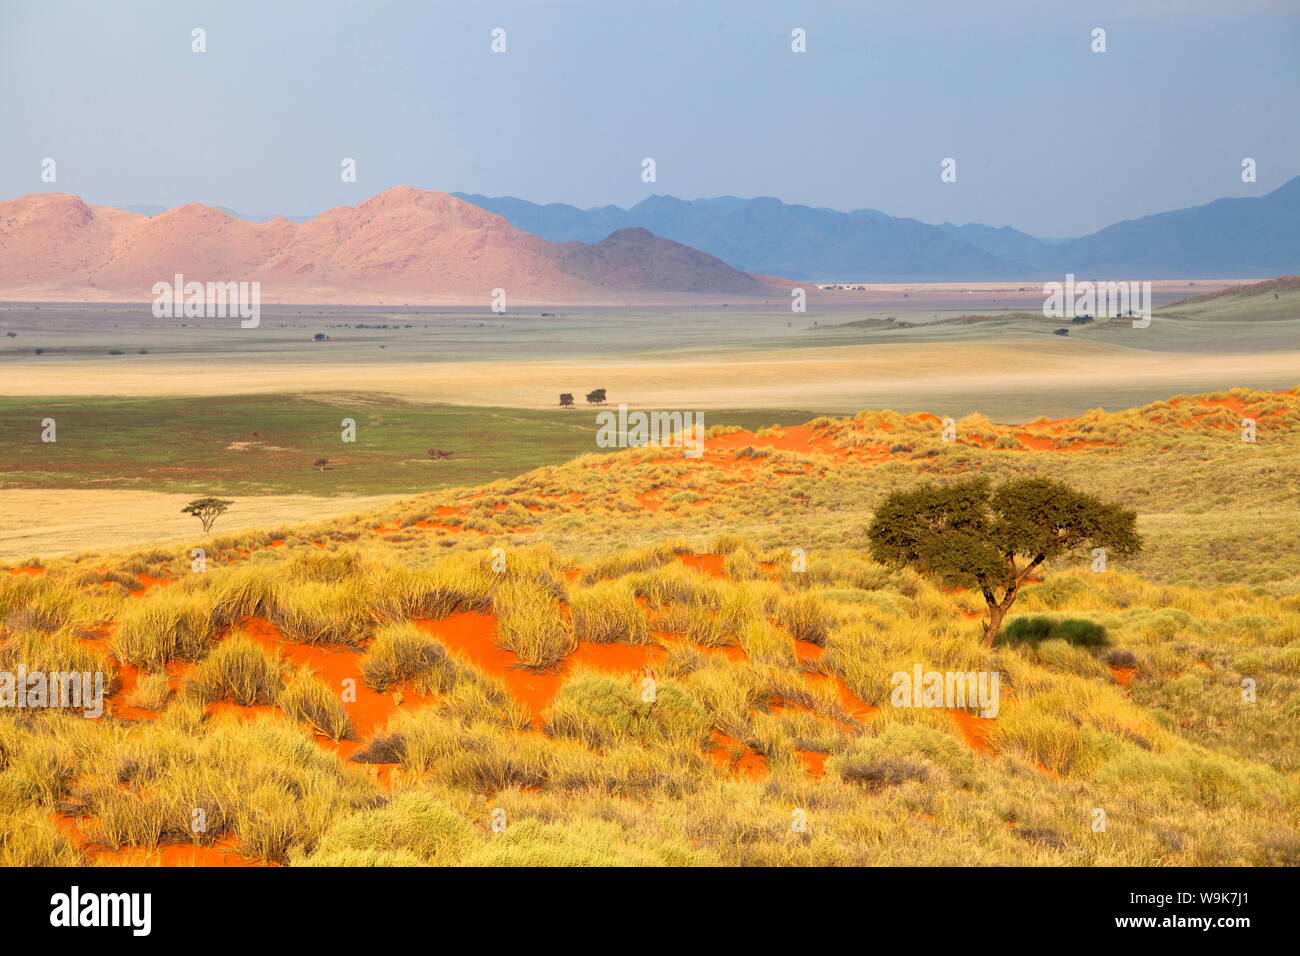 Panoramic view over the desert landscape of the Namib Rand game reserve bathed in evening light, Namib Naukluft Park, Namibia, Africa Stock Photo